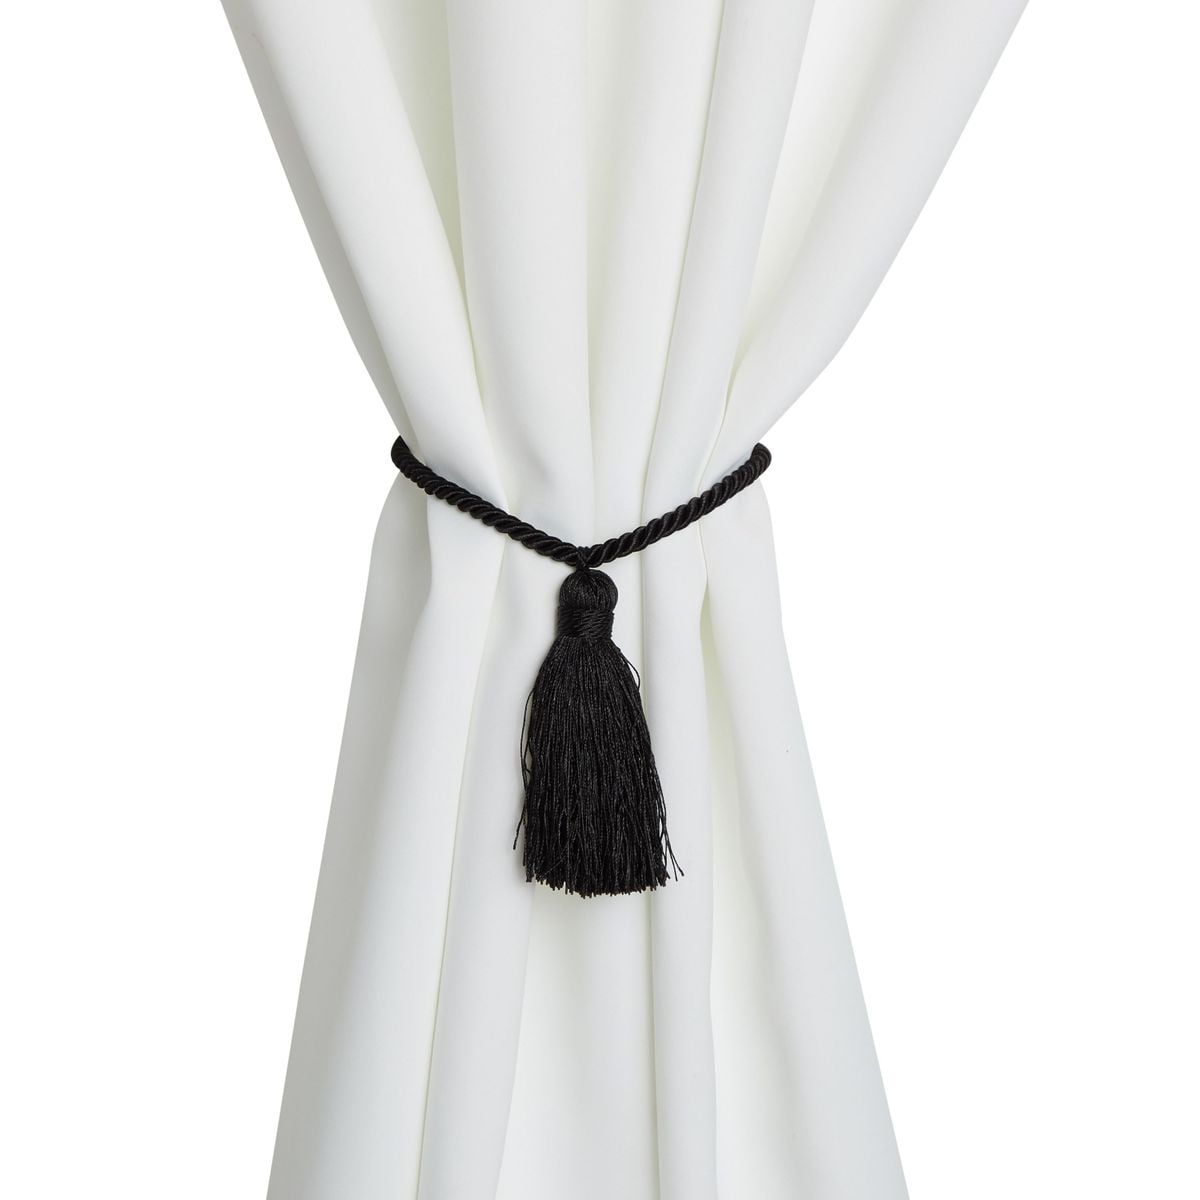 Set of 3 Black Curtains with White Tassels UNIVERSAL SIZE Accessories Decoration Plush Fabric